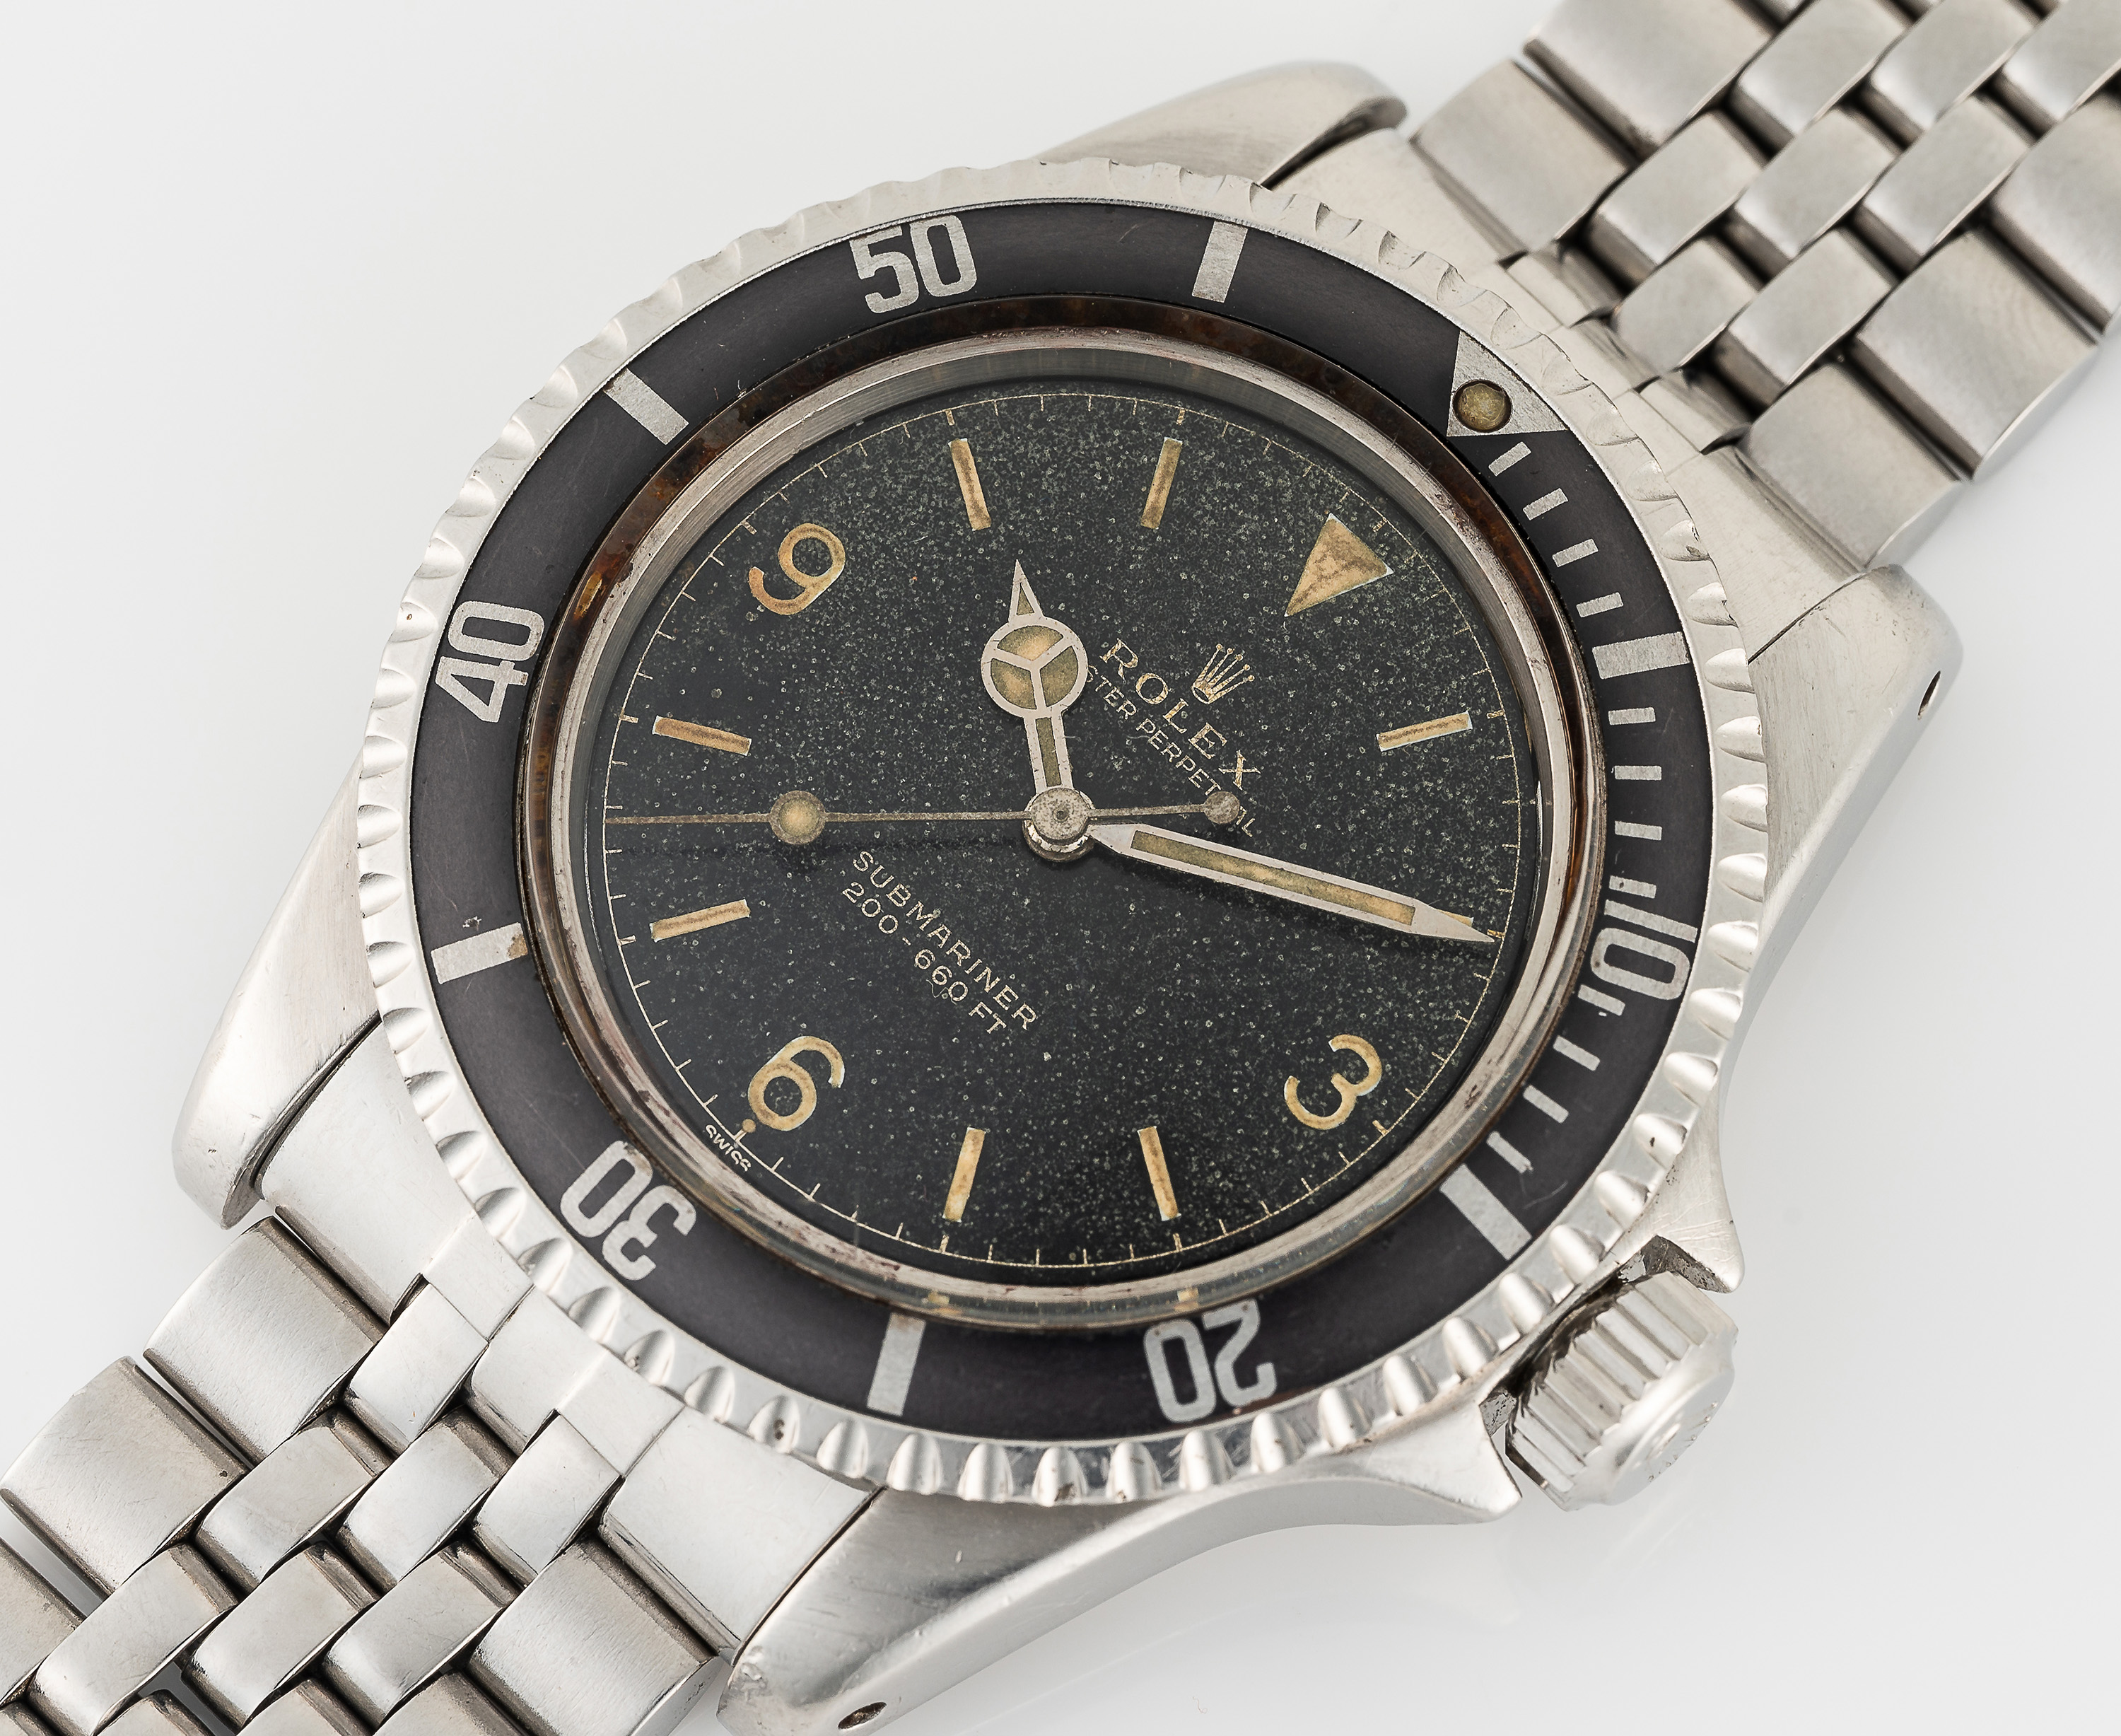 A VERY RARE GENTLEMAN'S SIZE STAINLESS STEEL ROLEX OYSTER PERPETUAL SUBMARINER WRIST WATCH CIRCA - Image 10 of 18